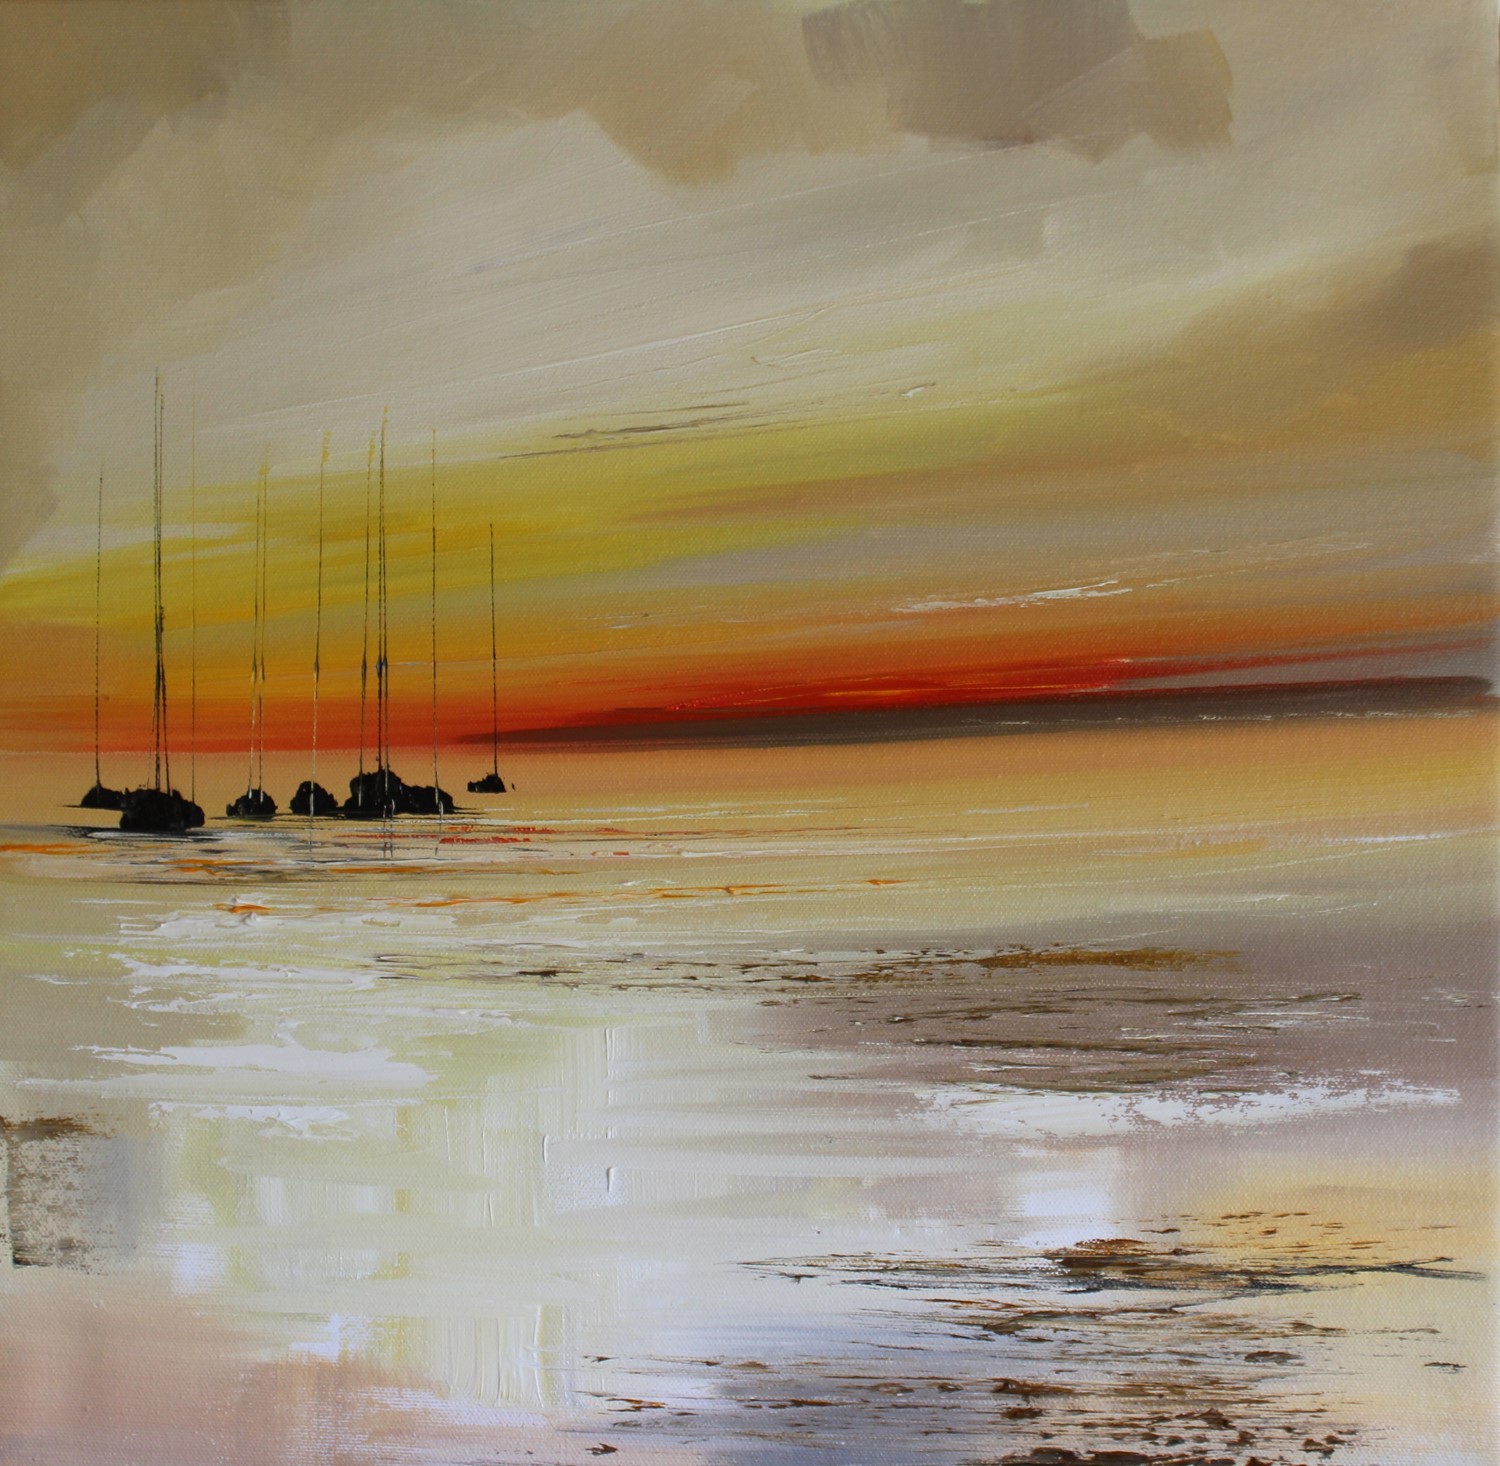 'Seven Yachts at Sunset' by artist Rosanne Barr